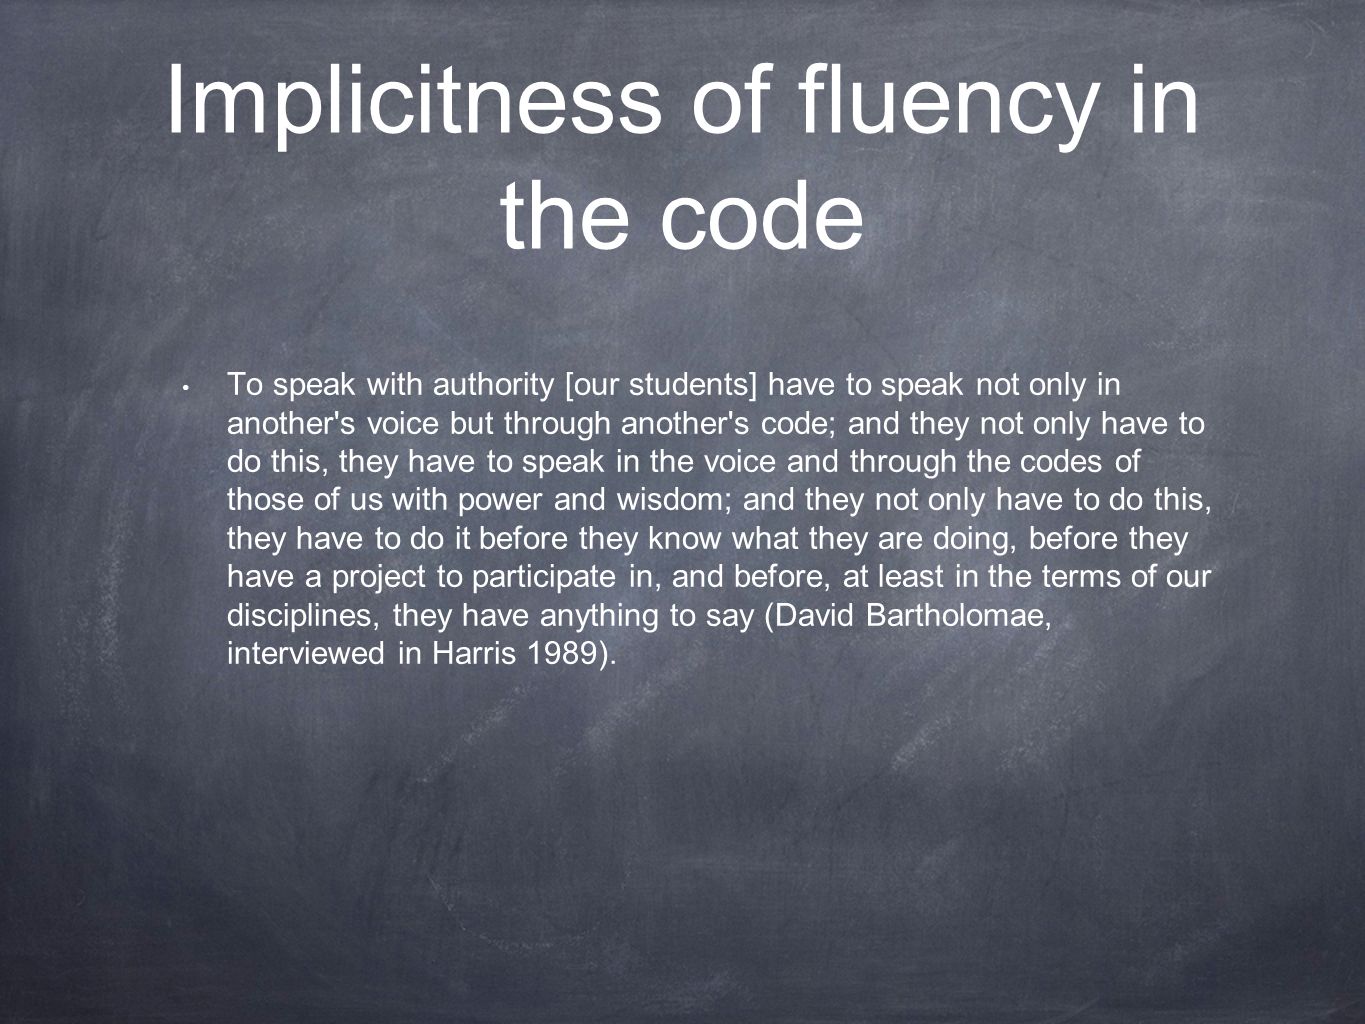 Implicitness of fluency in the code To speak with authority [our students] have to speak not only in another s voice but through another s code; and they not only have to do this, they have to speak in the voice and through the codes of those of us with power and wisdom; and they not only have to do this, they have to do it before they know what they are doing, before they have a project to participate in, and before, at least in the terms of our disciplines, they have anything to say (David Bartholomae, interviewed in Harris 1989).